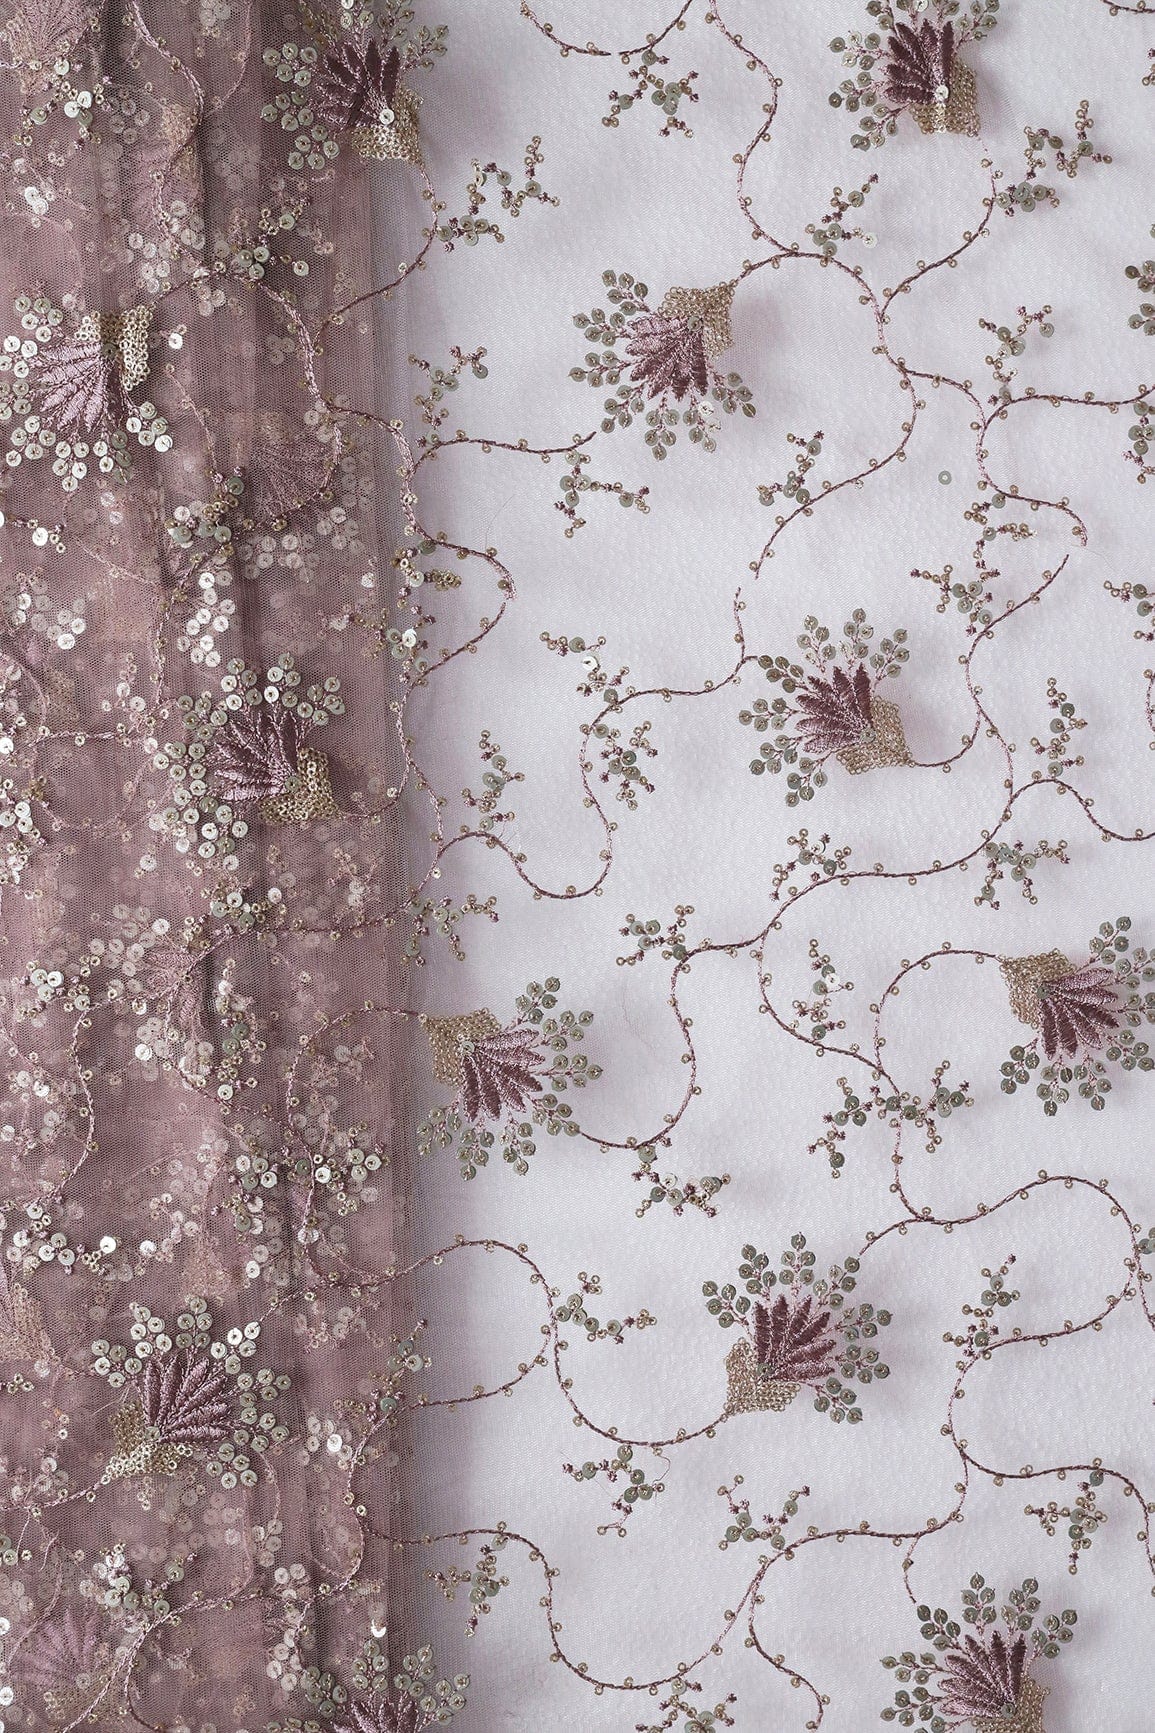 doeraa Embroidery Fabrics Gold And Silver Sequins With Mauve Thread Floral Embroidery Work On Mauve Soft Net Fabric